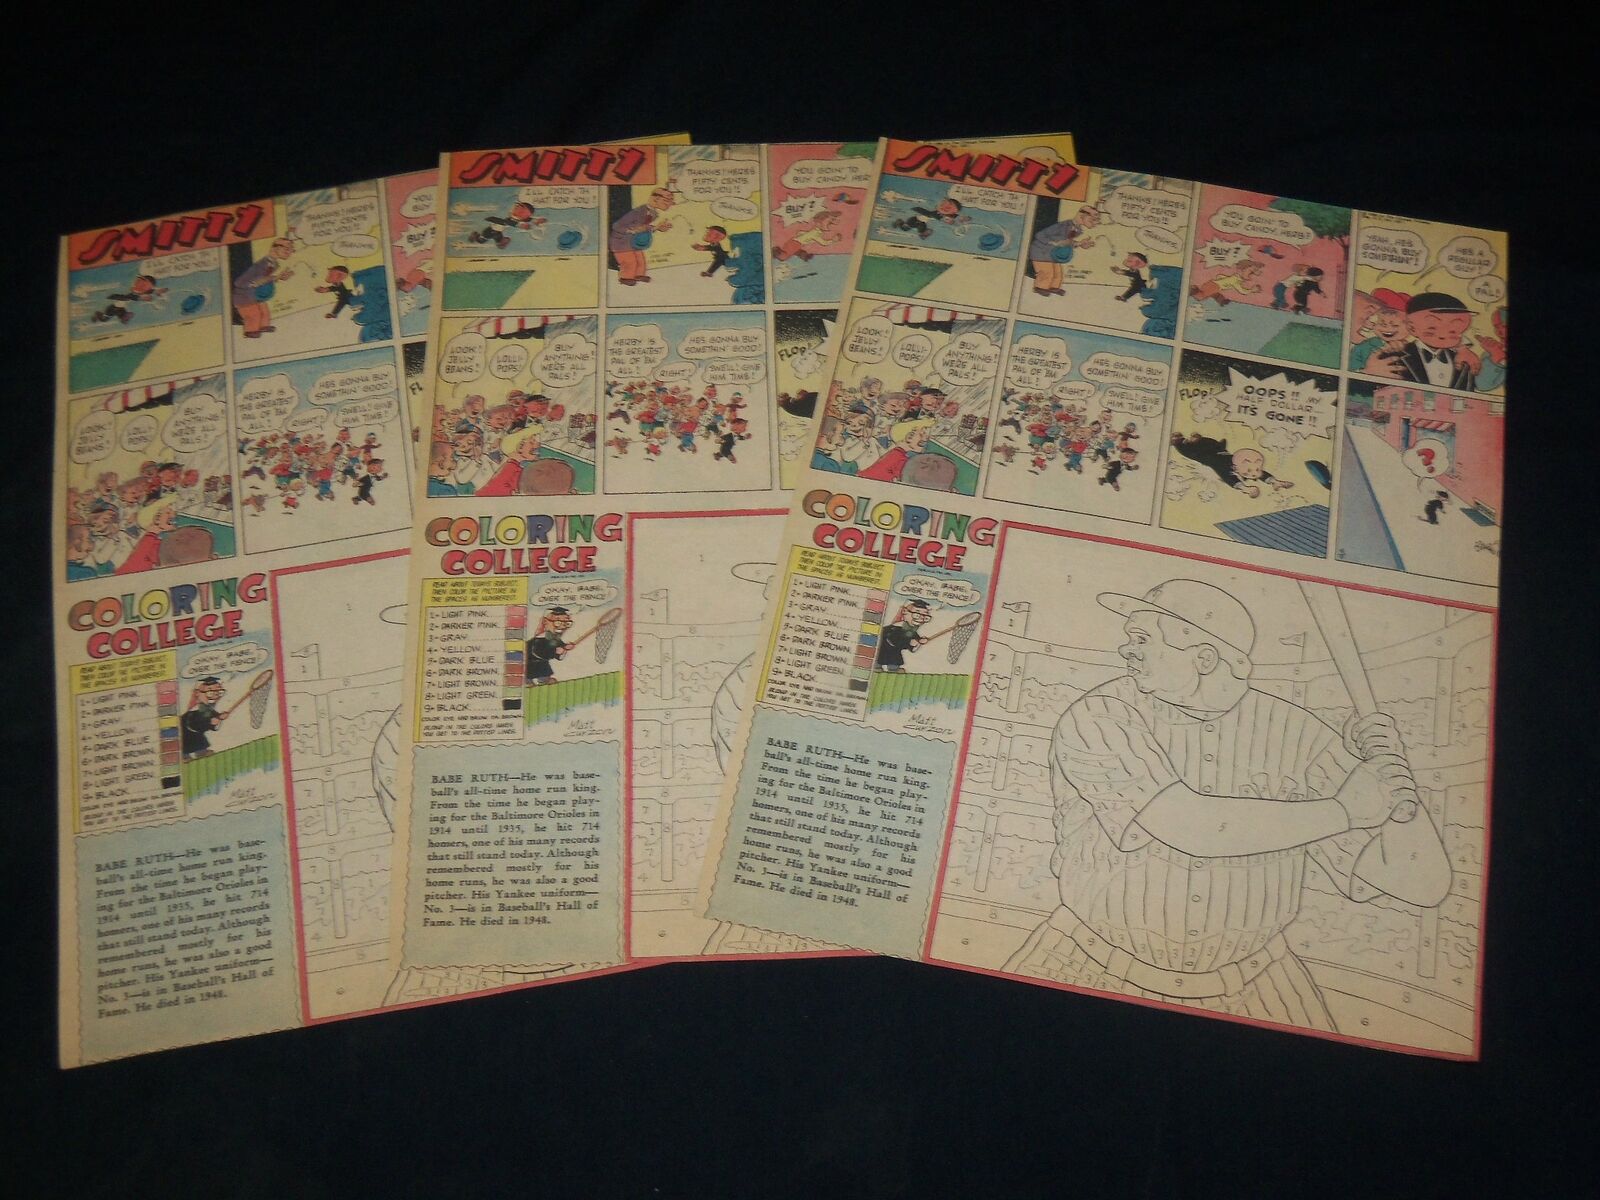 1963 NY DAILY SUNDAY NEWS BABE RUTH COLORING COLLEGE COMICS LOT OF 3 - NP 5384